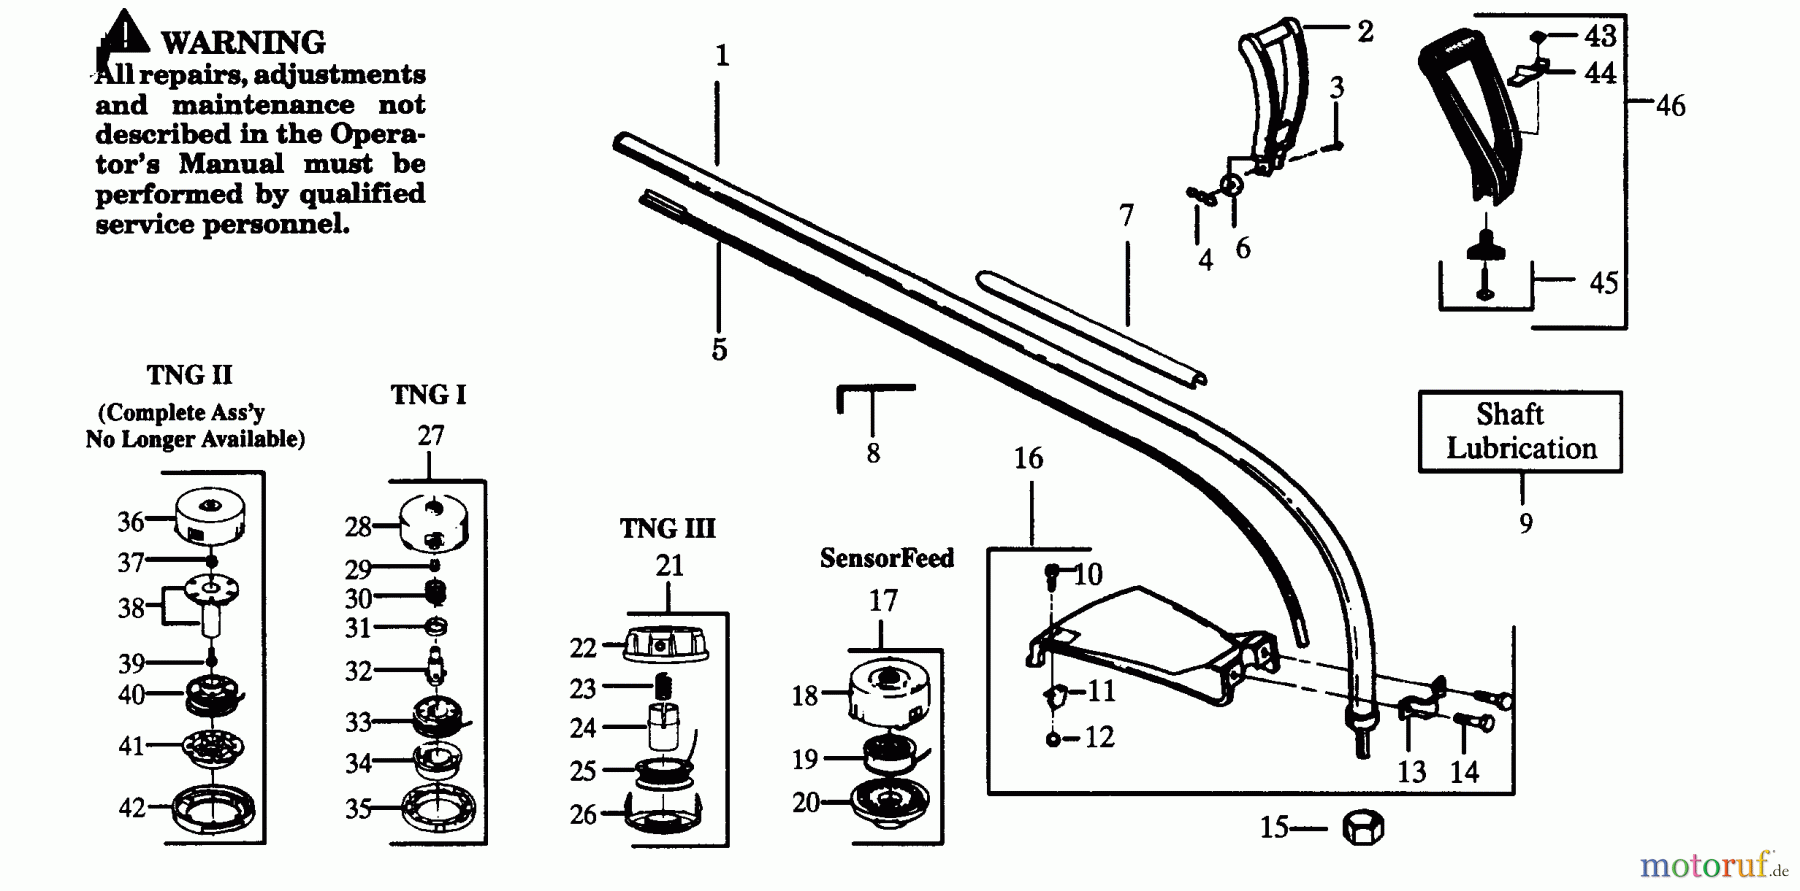  Poulan / Weed Eater Motorsensen, Trimmer GTI17C - Weed Eater String Trimmer DRIVE SHAFT & CUTTING HEAD